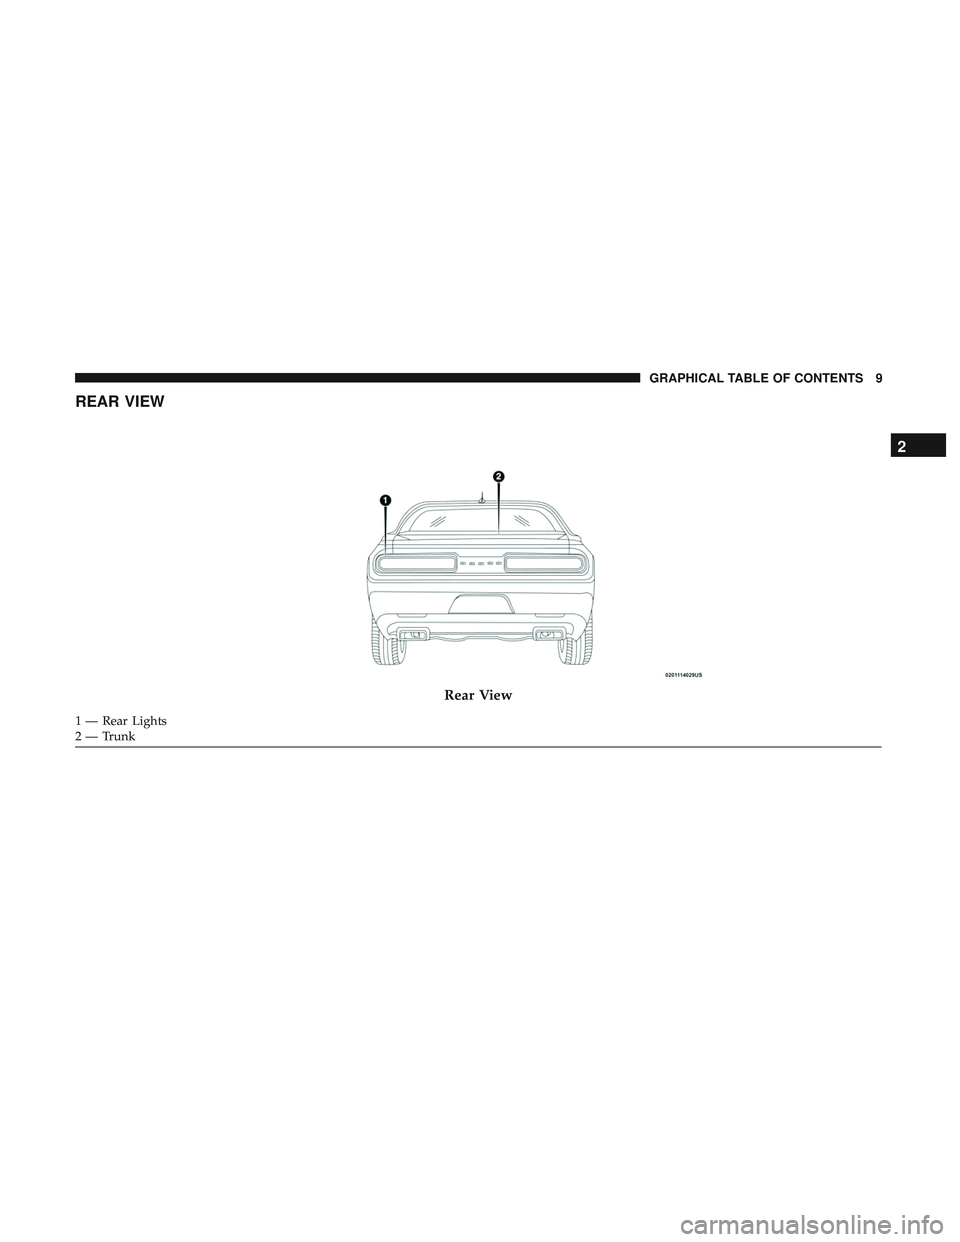 DODGE CHALLENGER 2019  Owners Manual REAR VIEW
Rear View
1 — Rear Lights
2 — Trunk
2
GRAPHICAL TABLE OF CONTENTS 9 